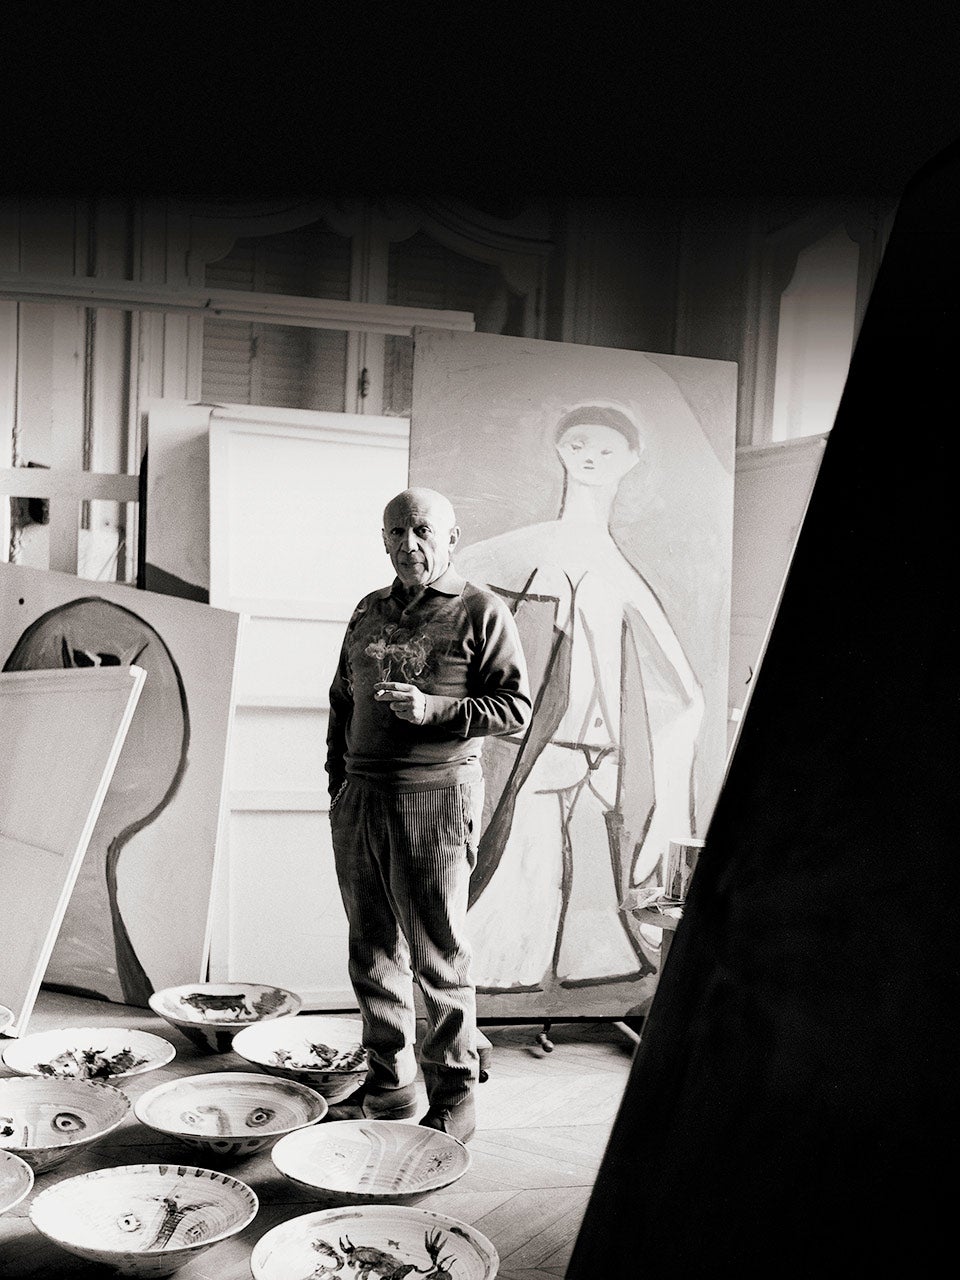 Fifty years after Picasso’s death, we still struggle with the figure of the monstrous genius